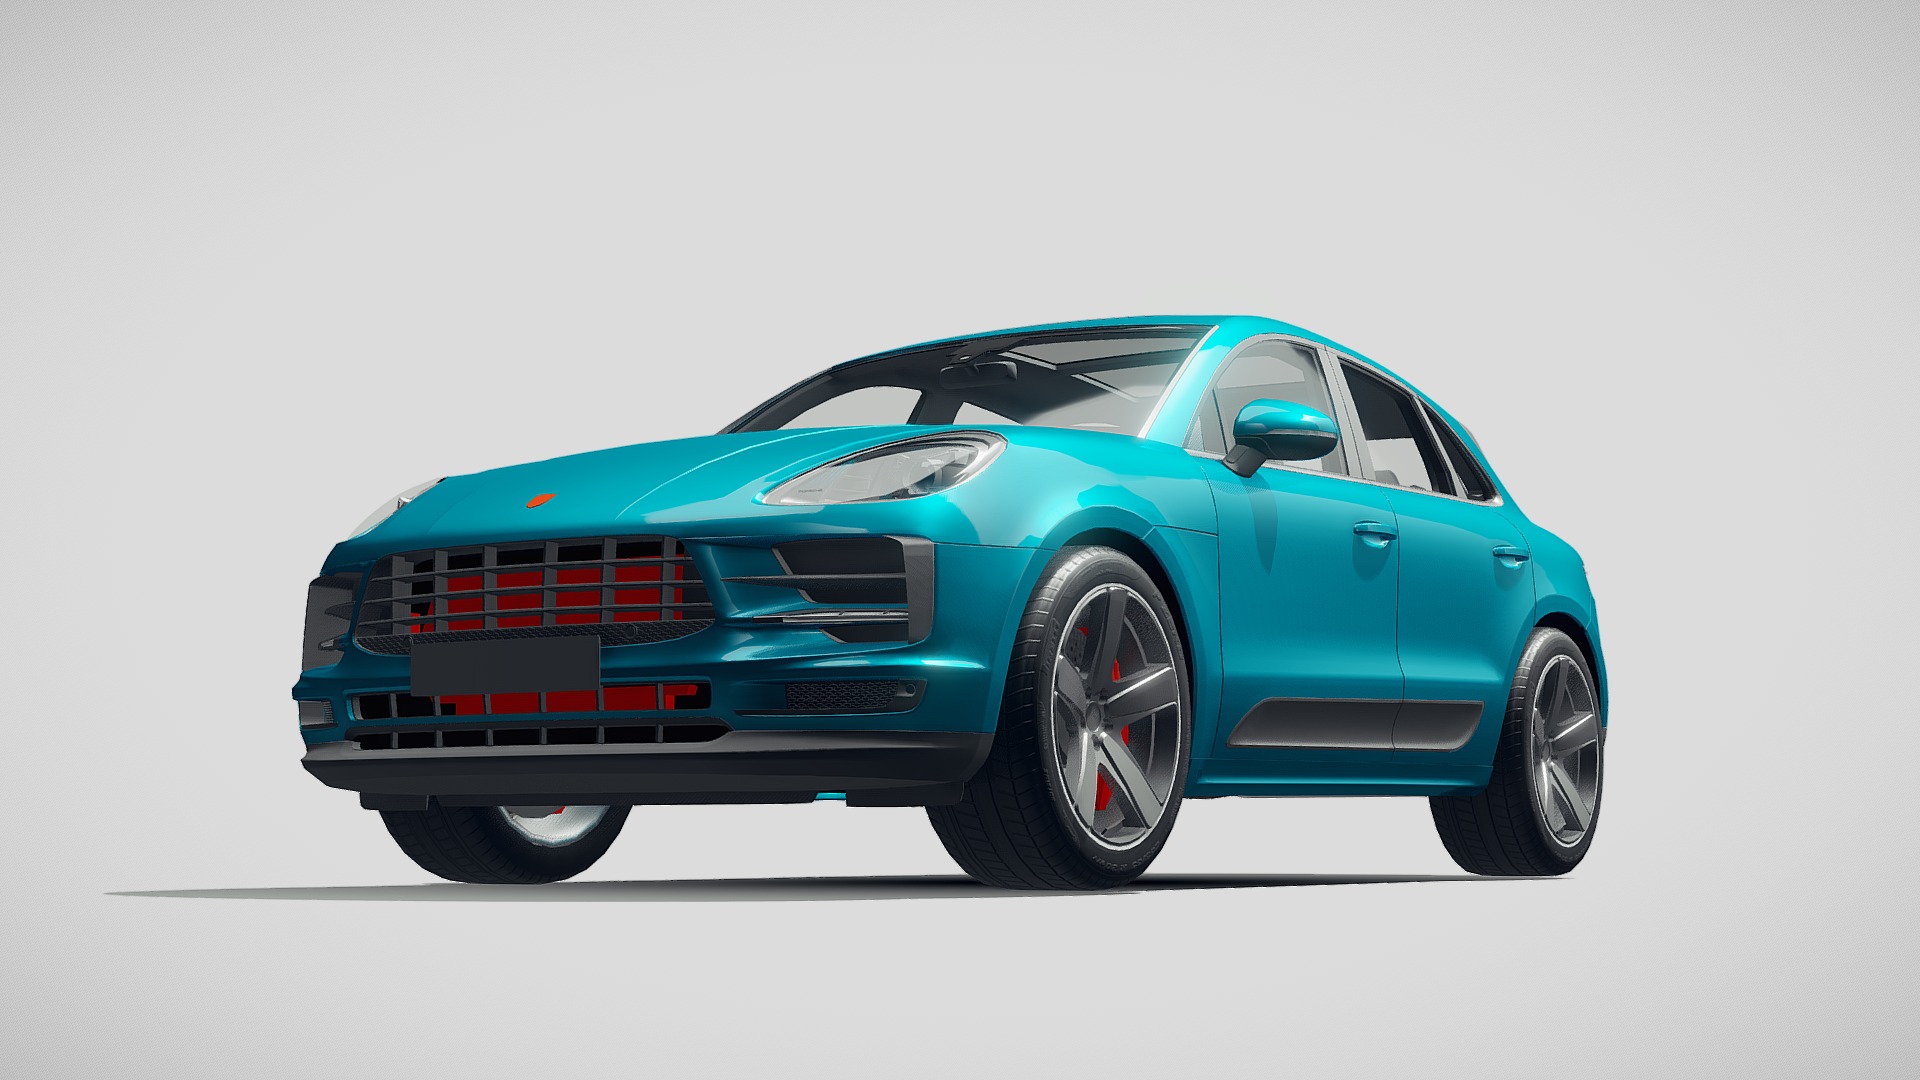 3D model LowPoly Porsche Macan 2019 - This is a 3D model of the LowPoly Porsche Macan 2019. The 3D model is about a blue car with a white background.